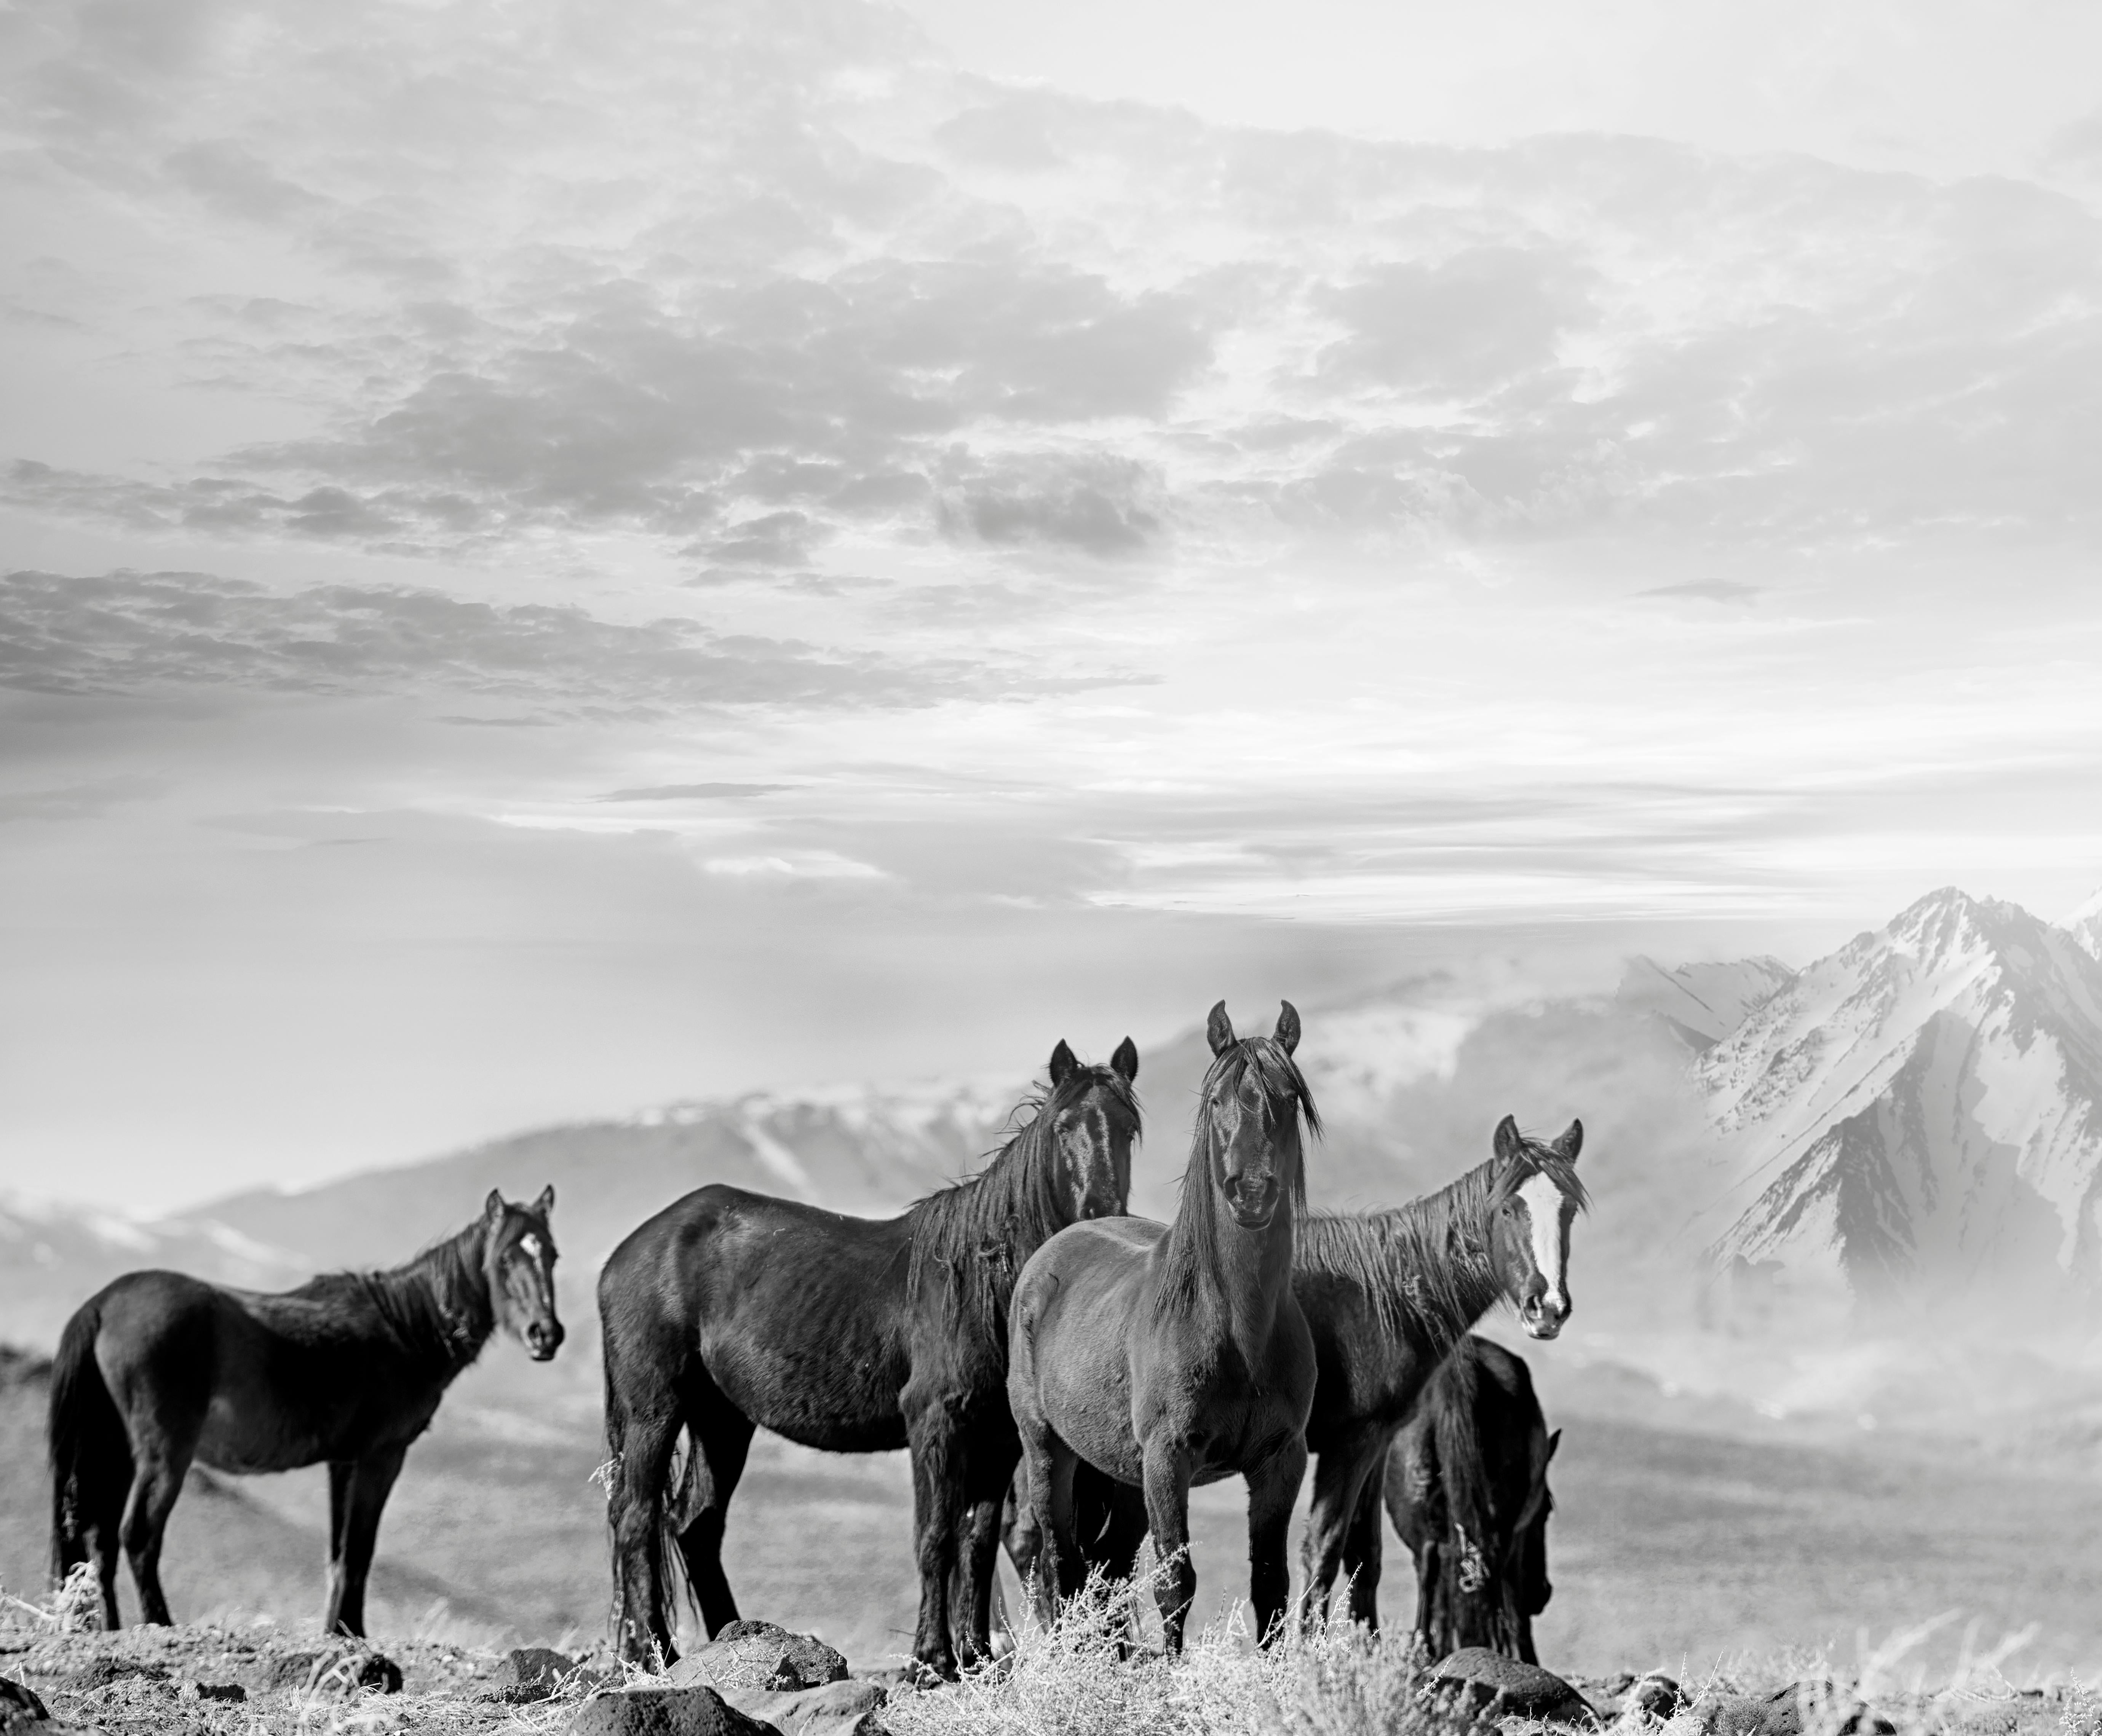 Shane Russeck Black and White Photograph - High Sierra Mustangs 36x48 Black & White Photography Wild Horses, Unsigned